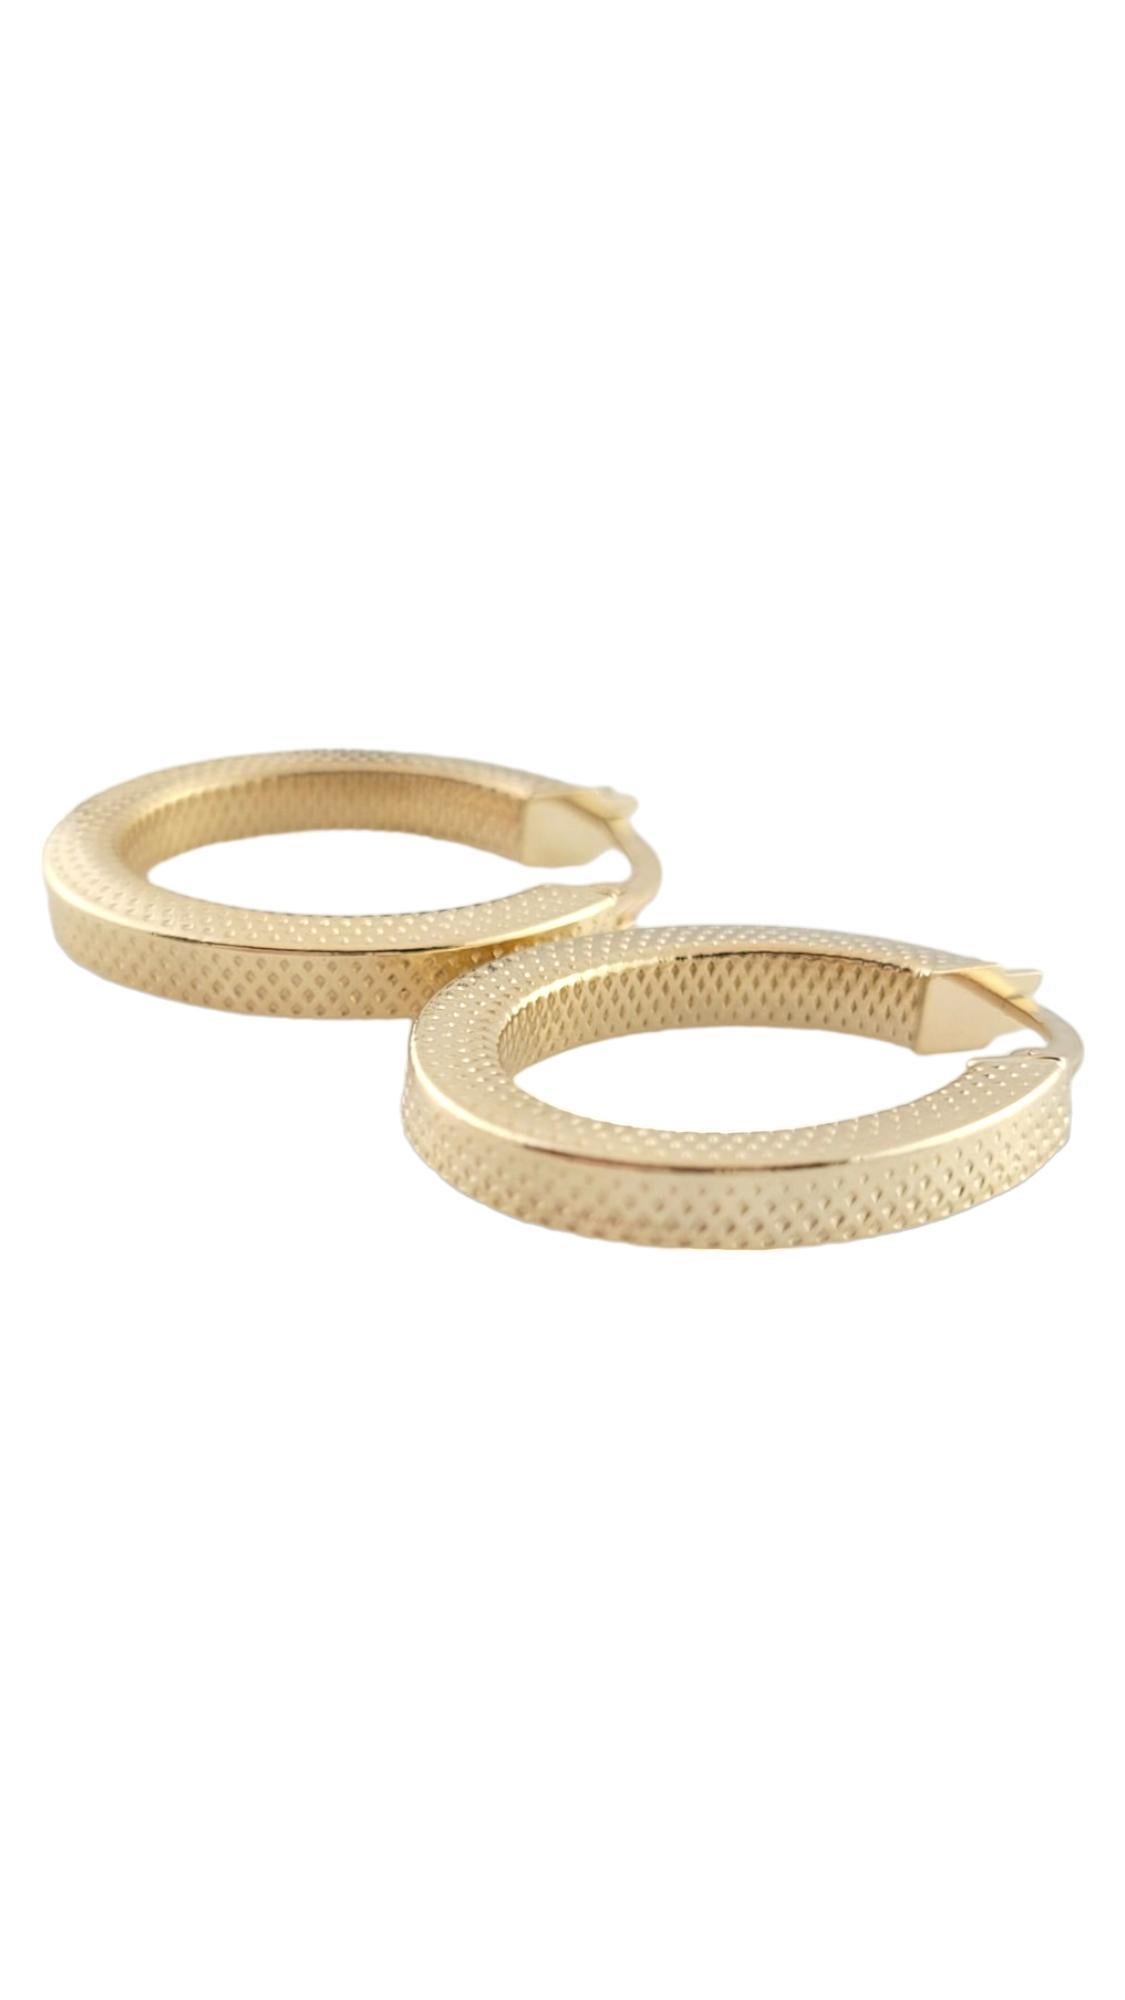 Vintage 14K Yellow Gold Textured Oval Hoop Earrings 

This gorgeous set of oval textured hoops are crafted from 14K yellow gold!

Size: 23.12mm X 19.76mm X 3.11mm

Weight: 1.5 dwt/ 2.4 g

Hallmark: ITALY 14K

Very good condition, professionally